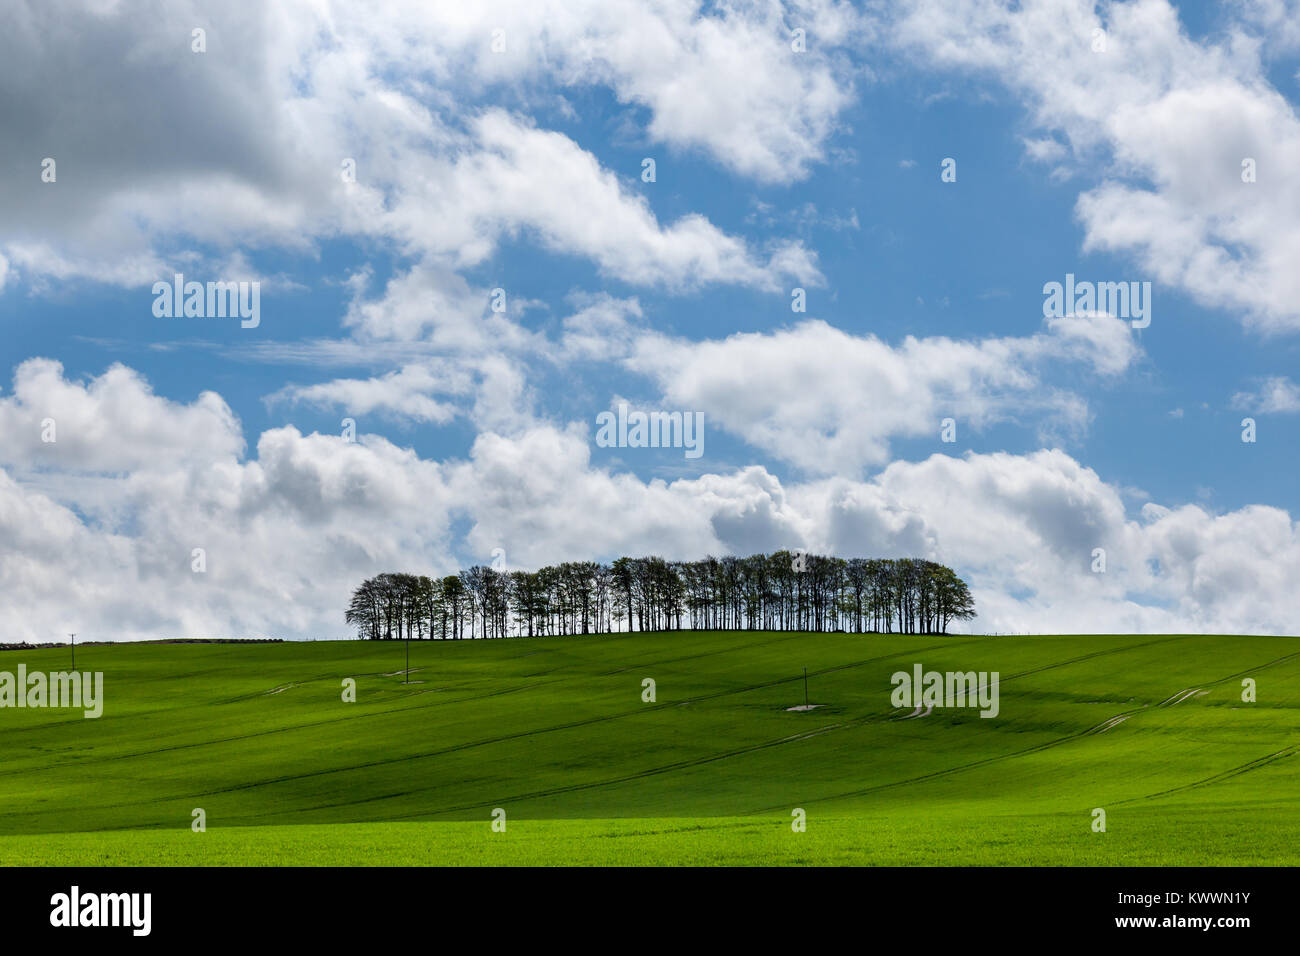 Trees on the horizon against a cloudy blue sky. England UK Stock Photo